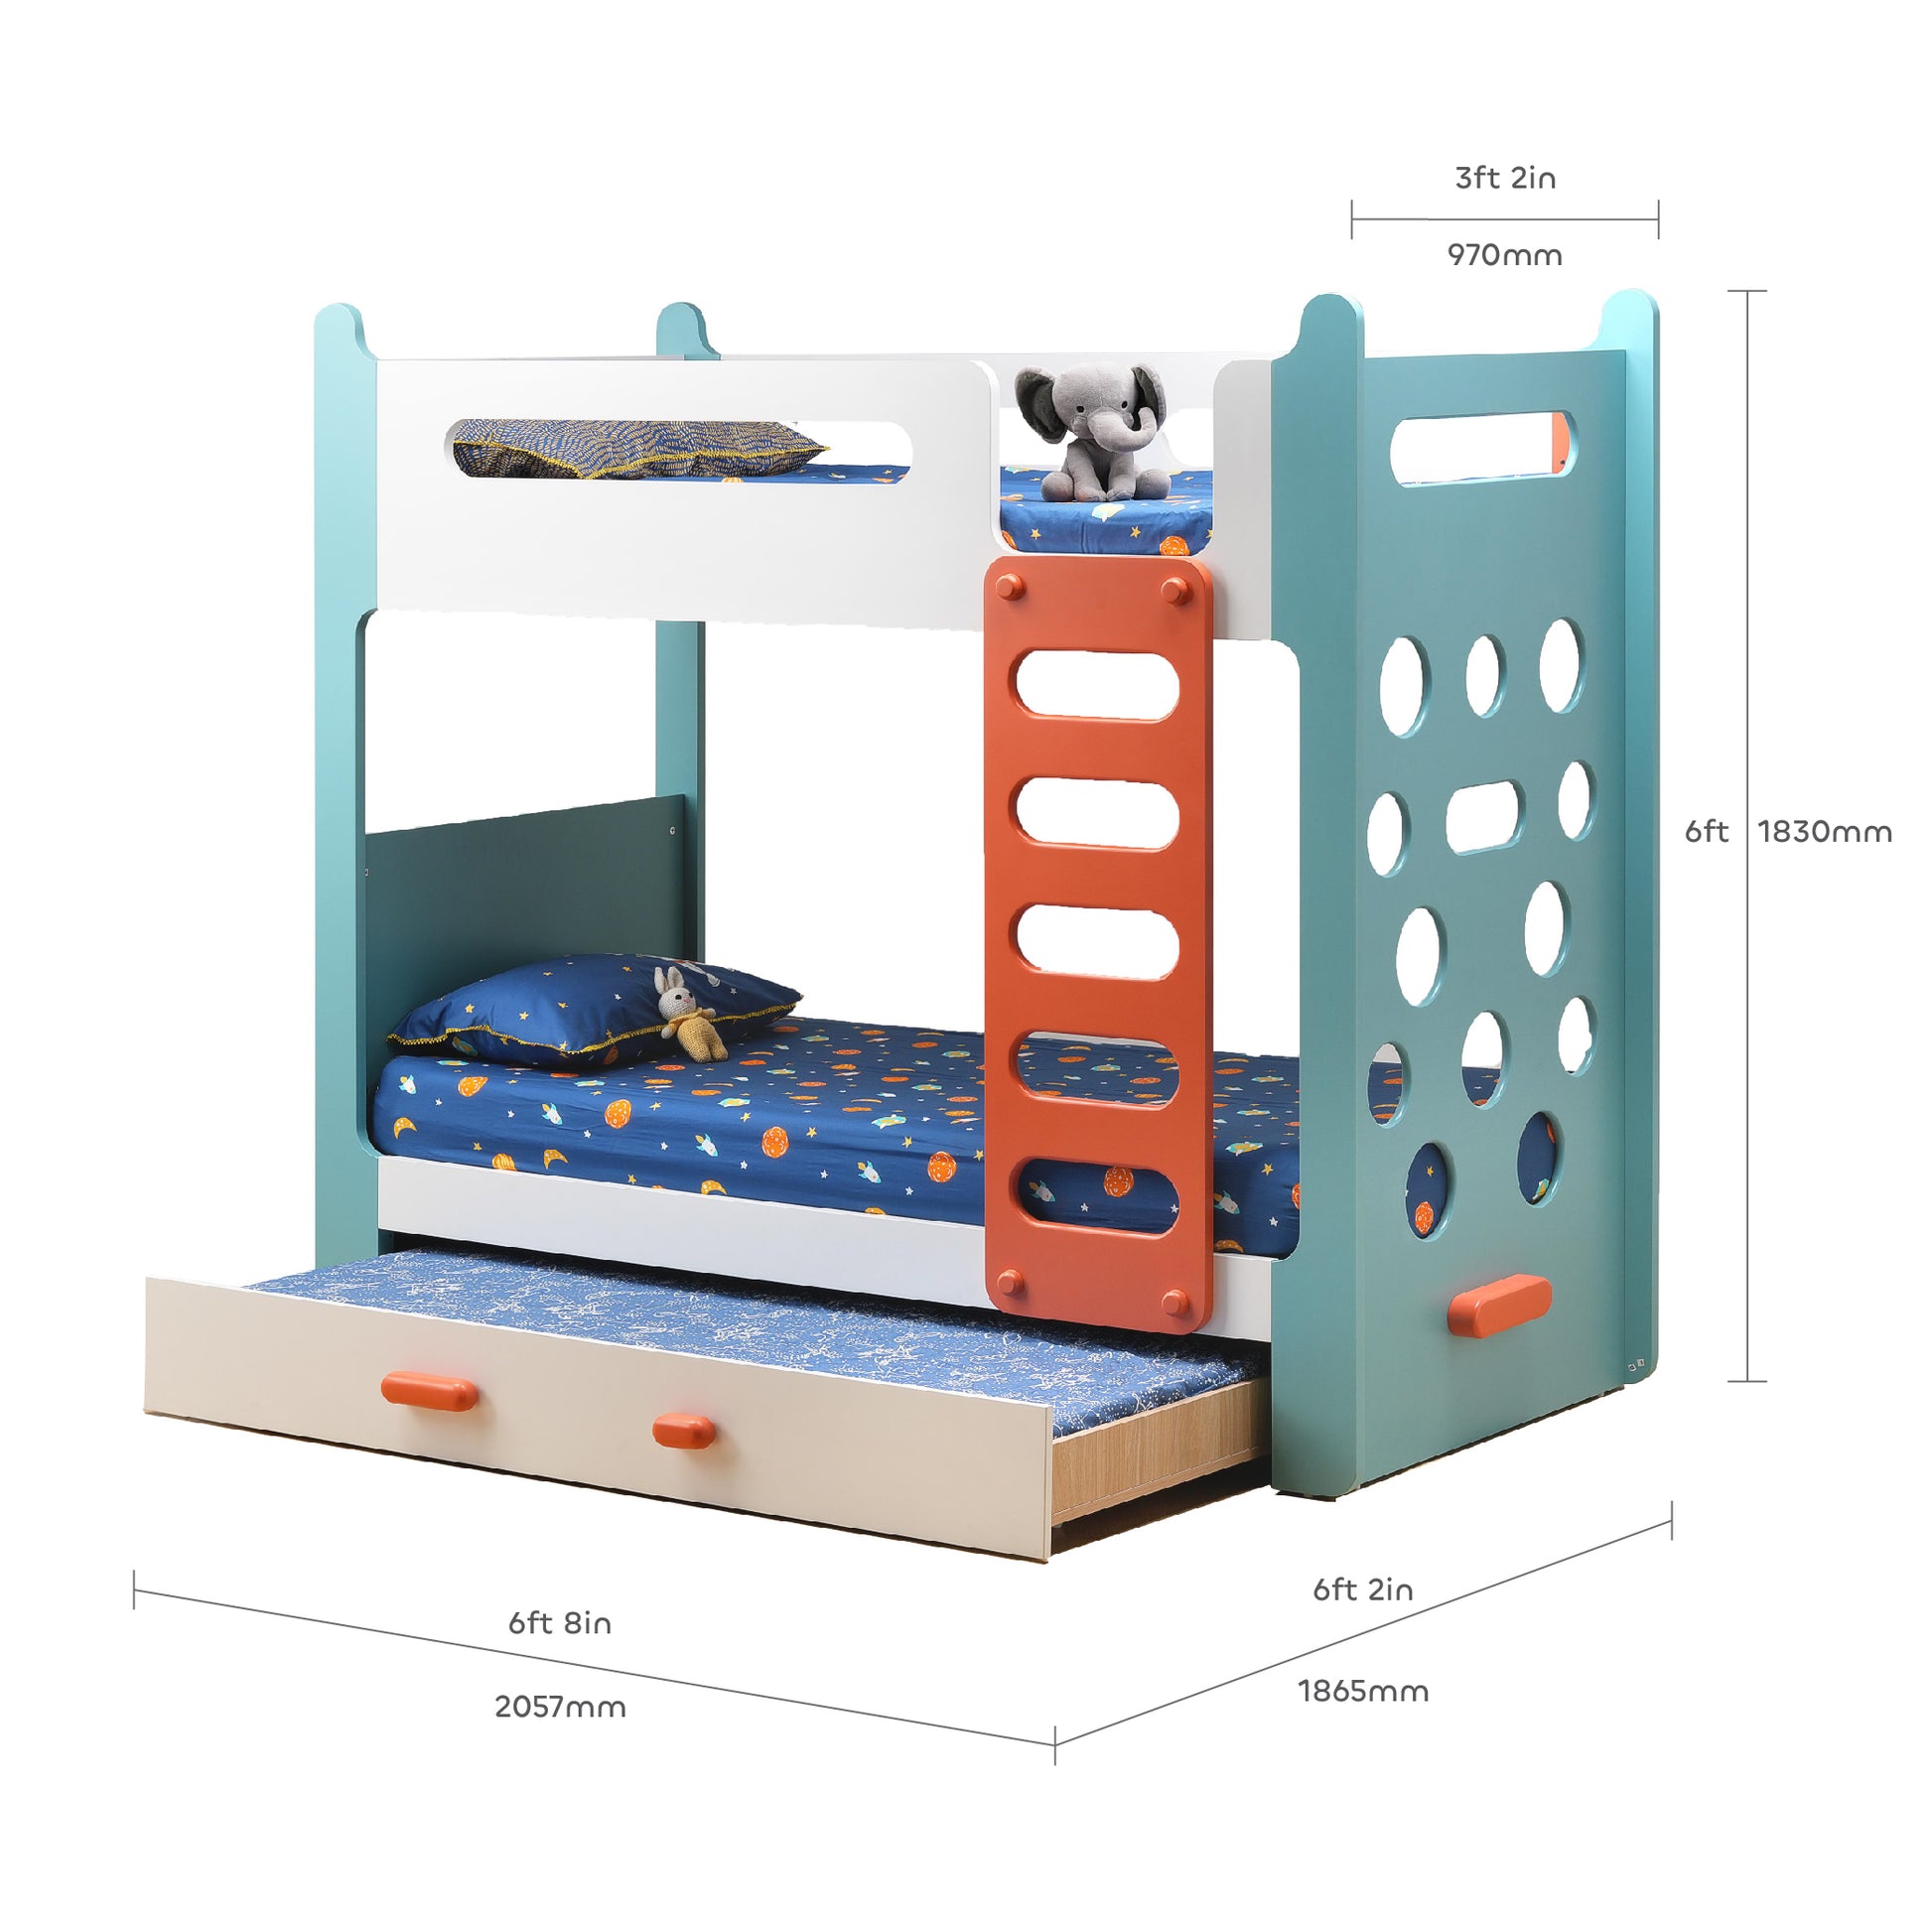 media_gallary Climbr Bunk Bed with 2 Mattresses 3